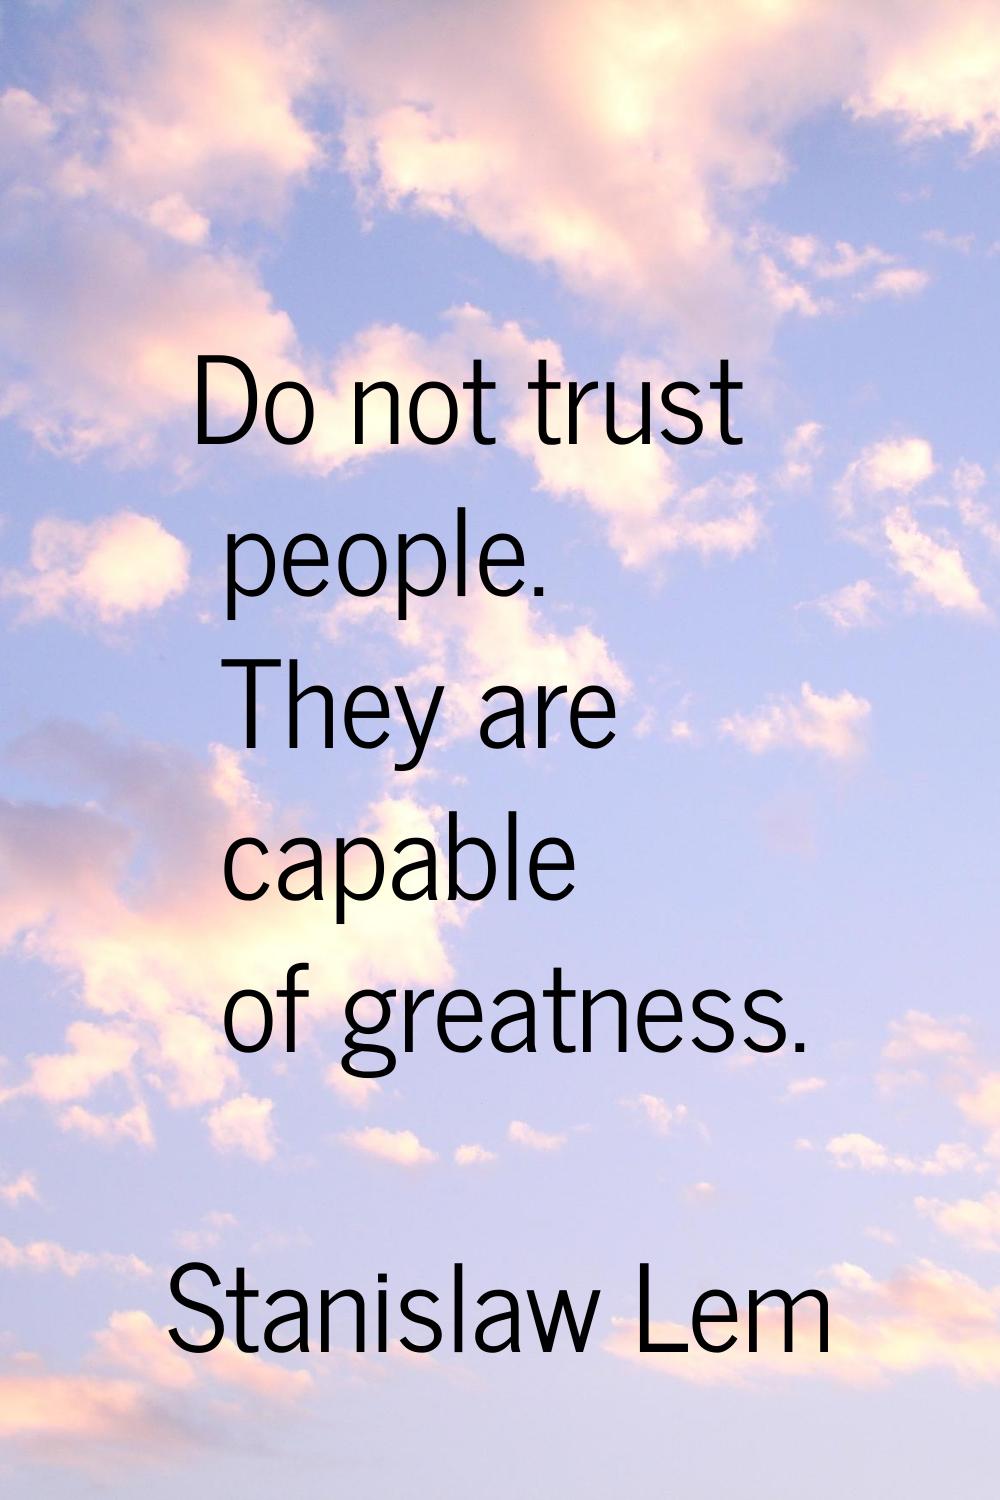 Do not trust people. They are capable of greatness.